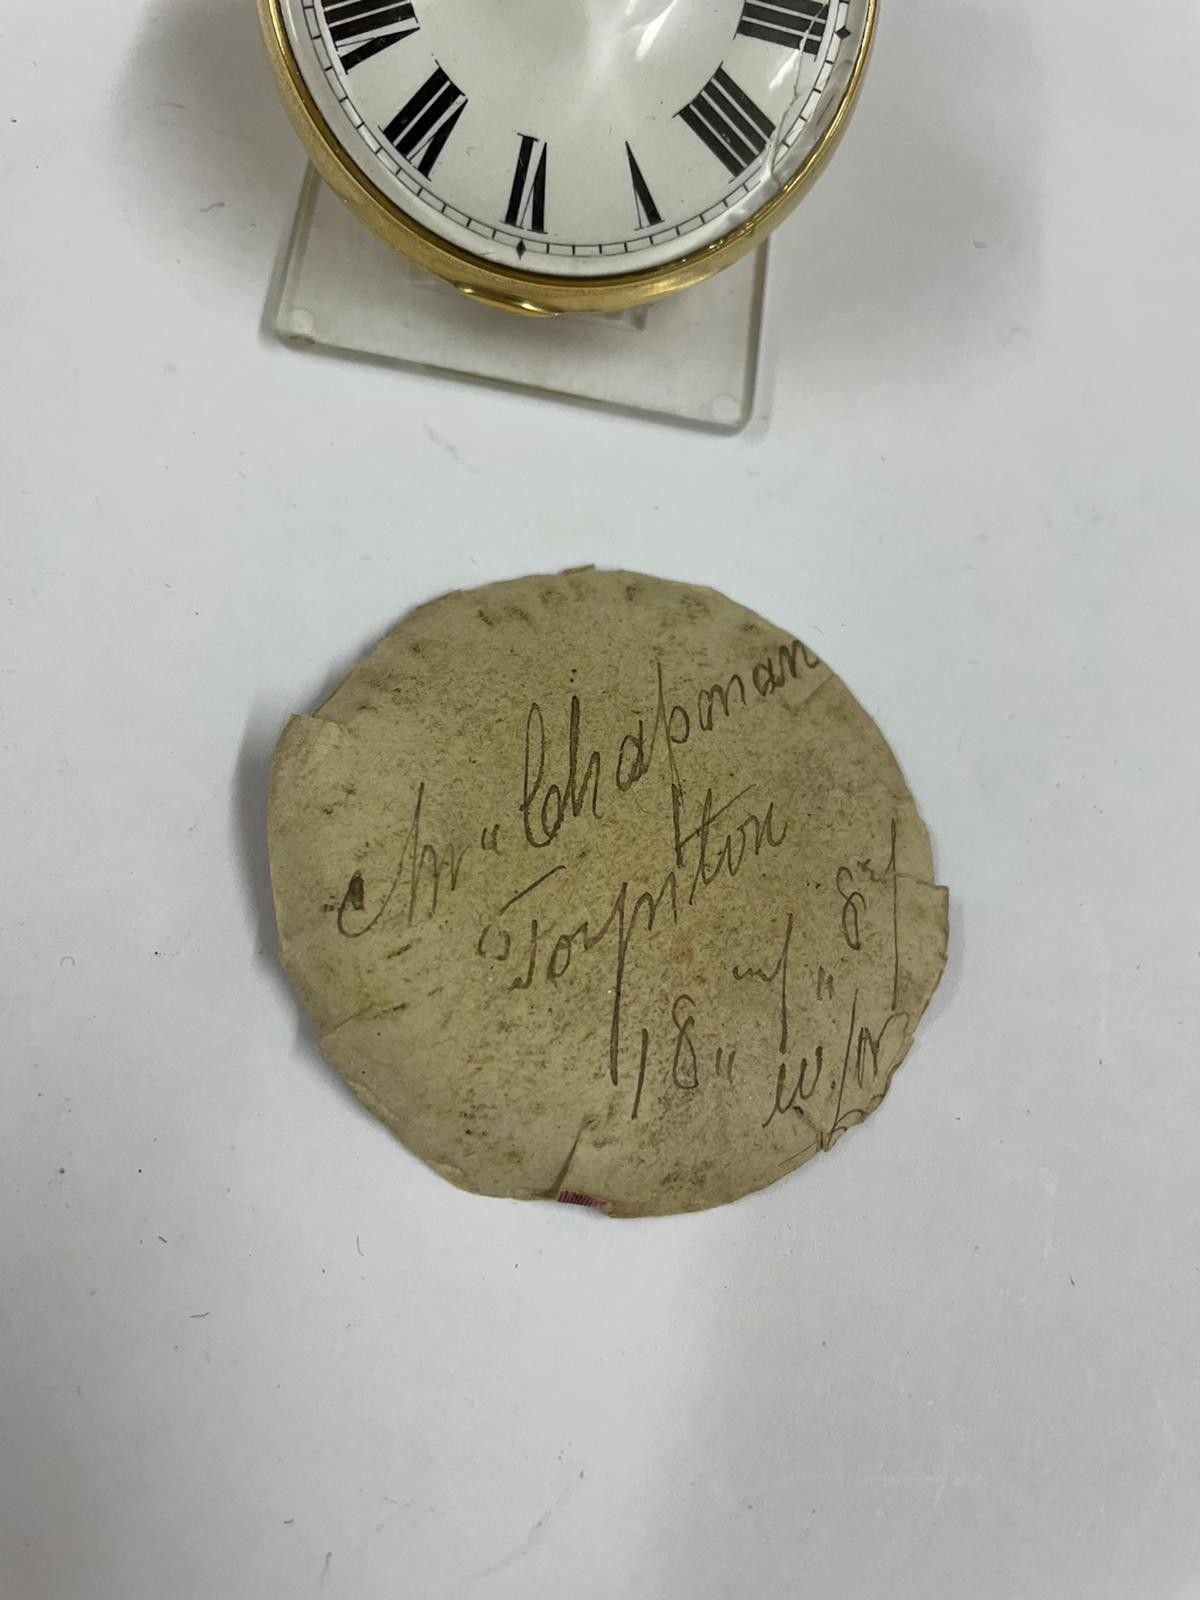 Antique yellow metal verge fusee pocket watch, working, 155.9g but sold with no guarantees - Image 6 of 9